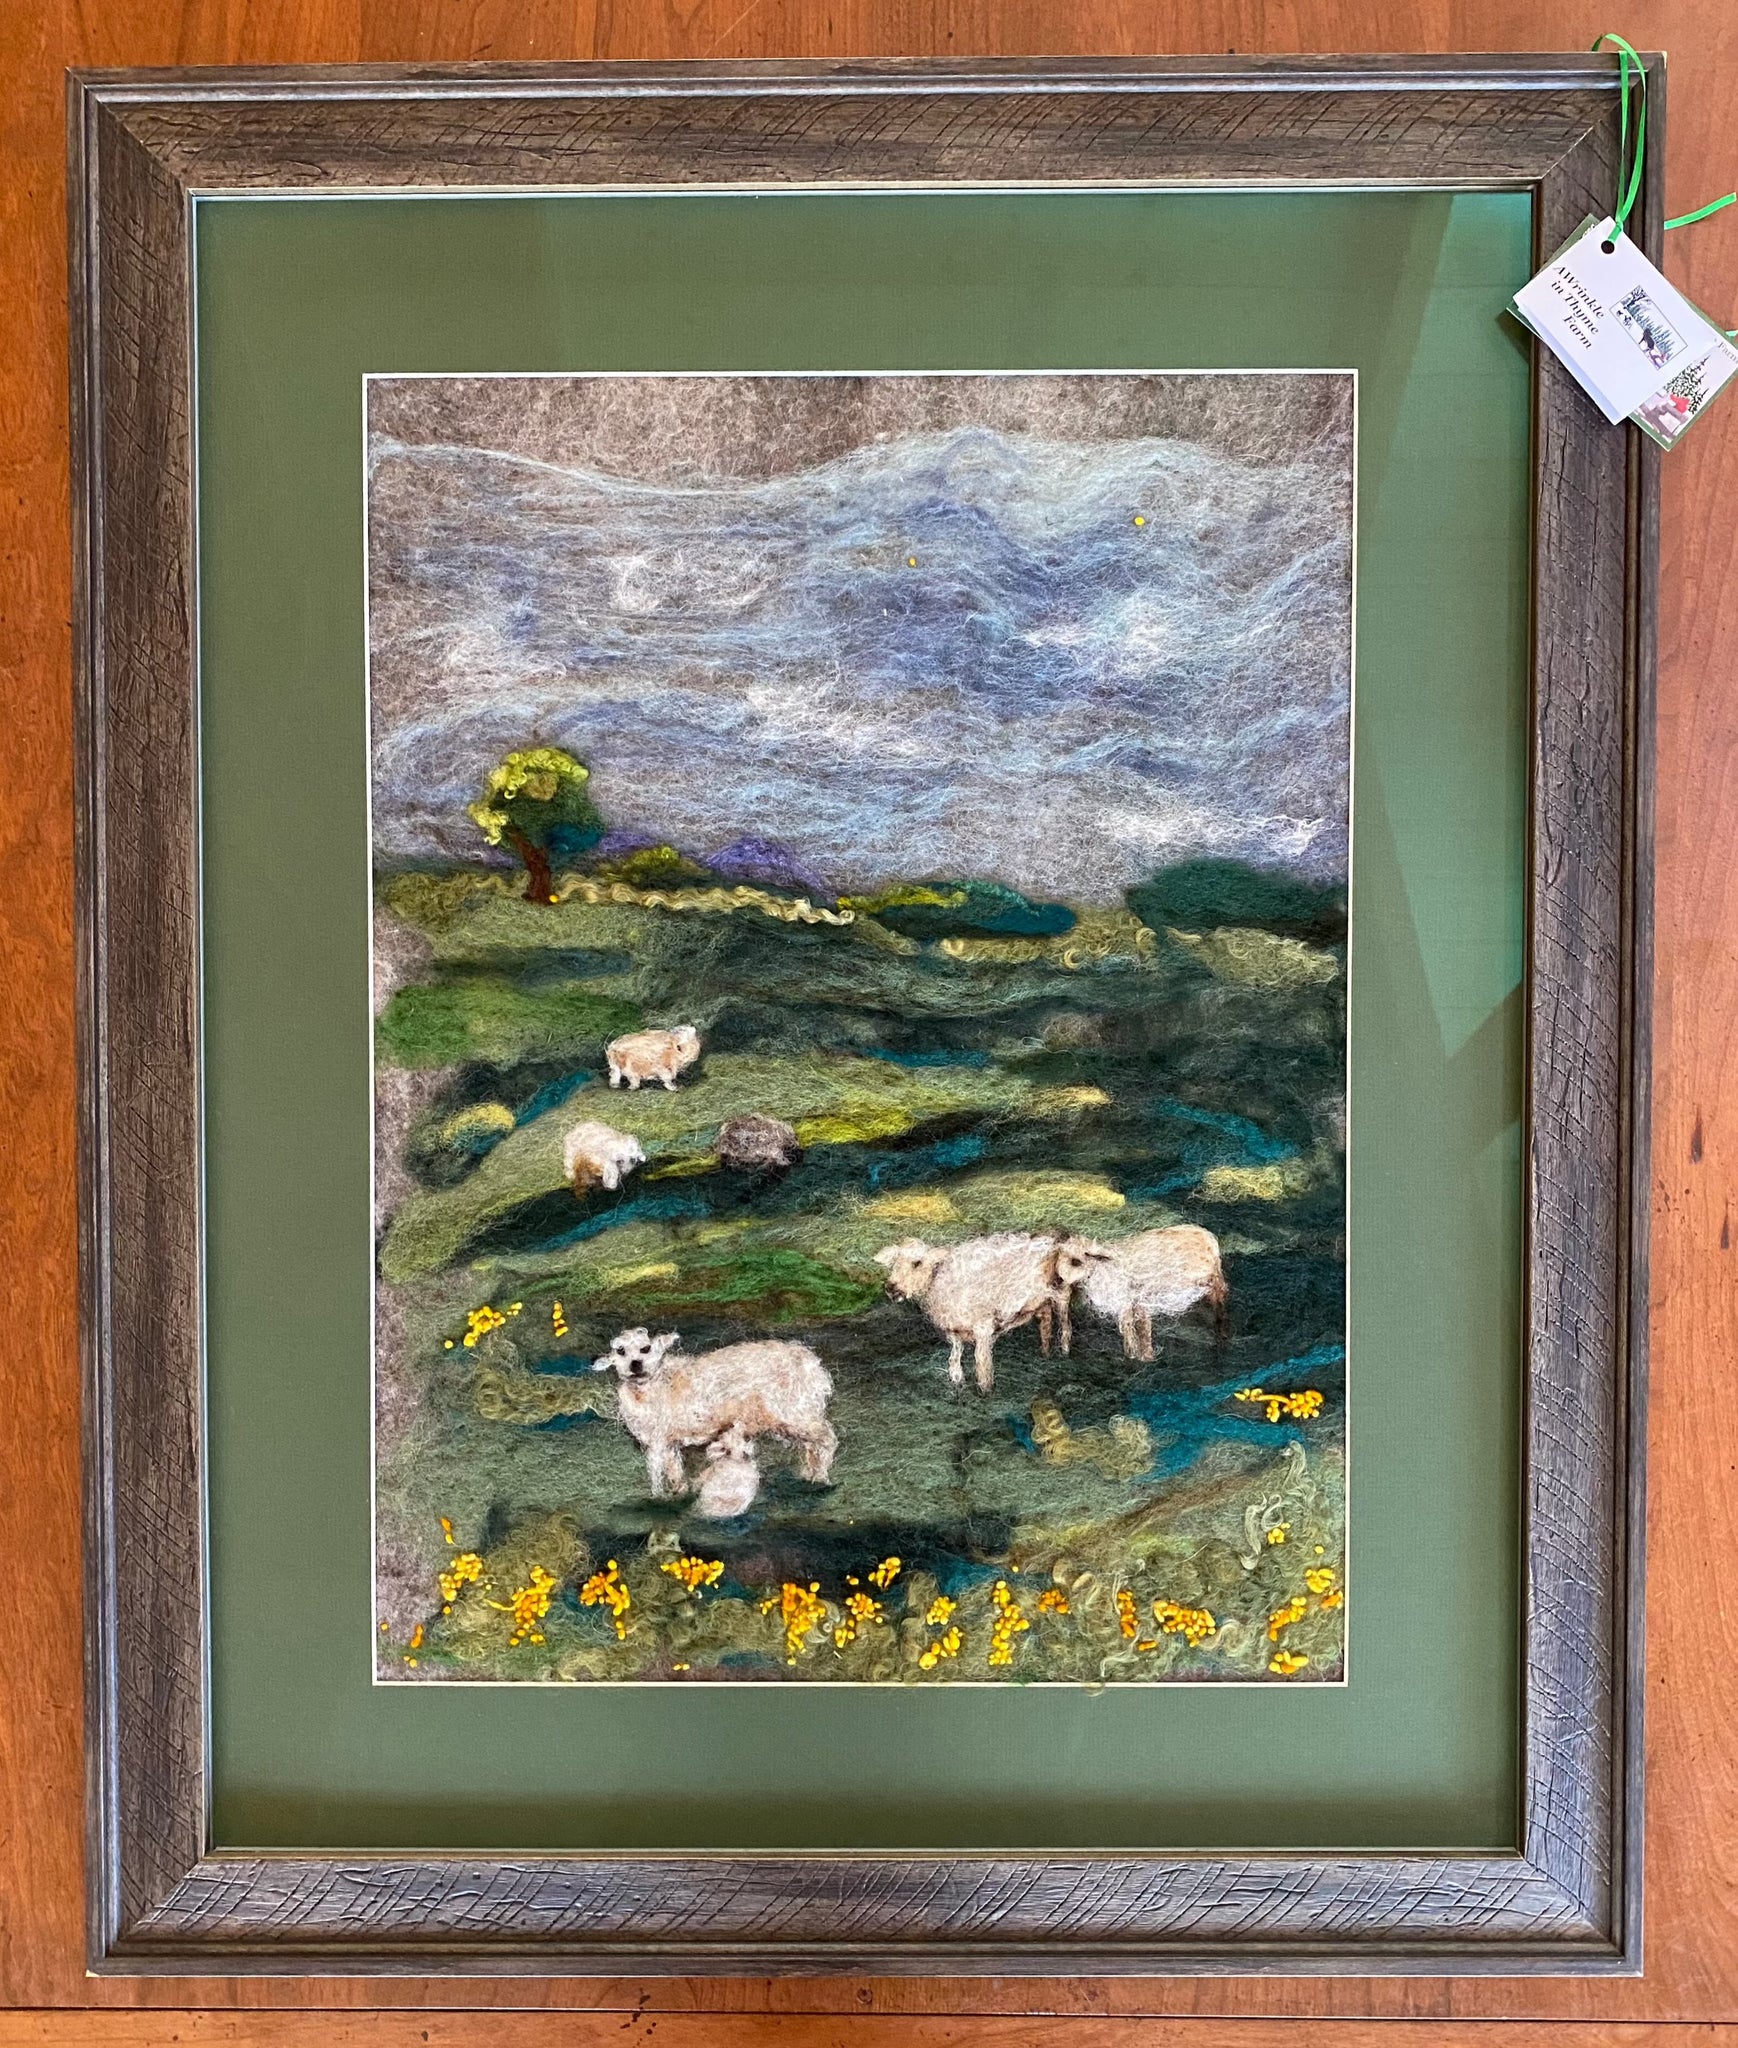 Sheep in the Field Needle Felted Art